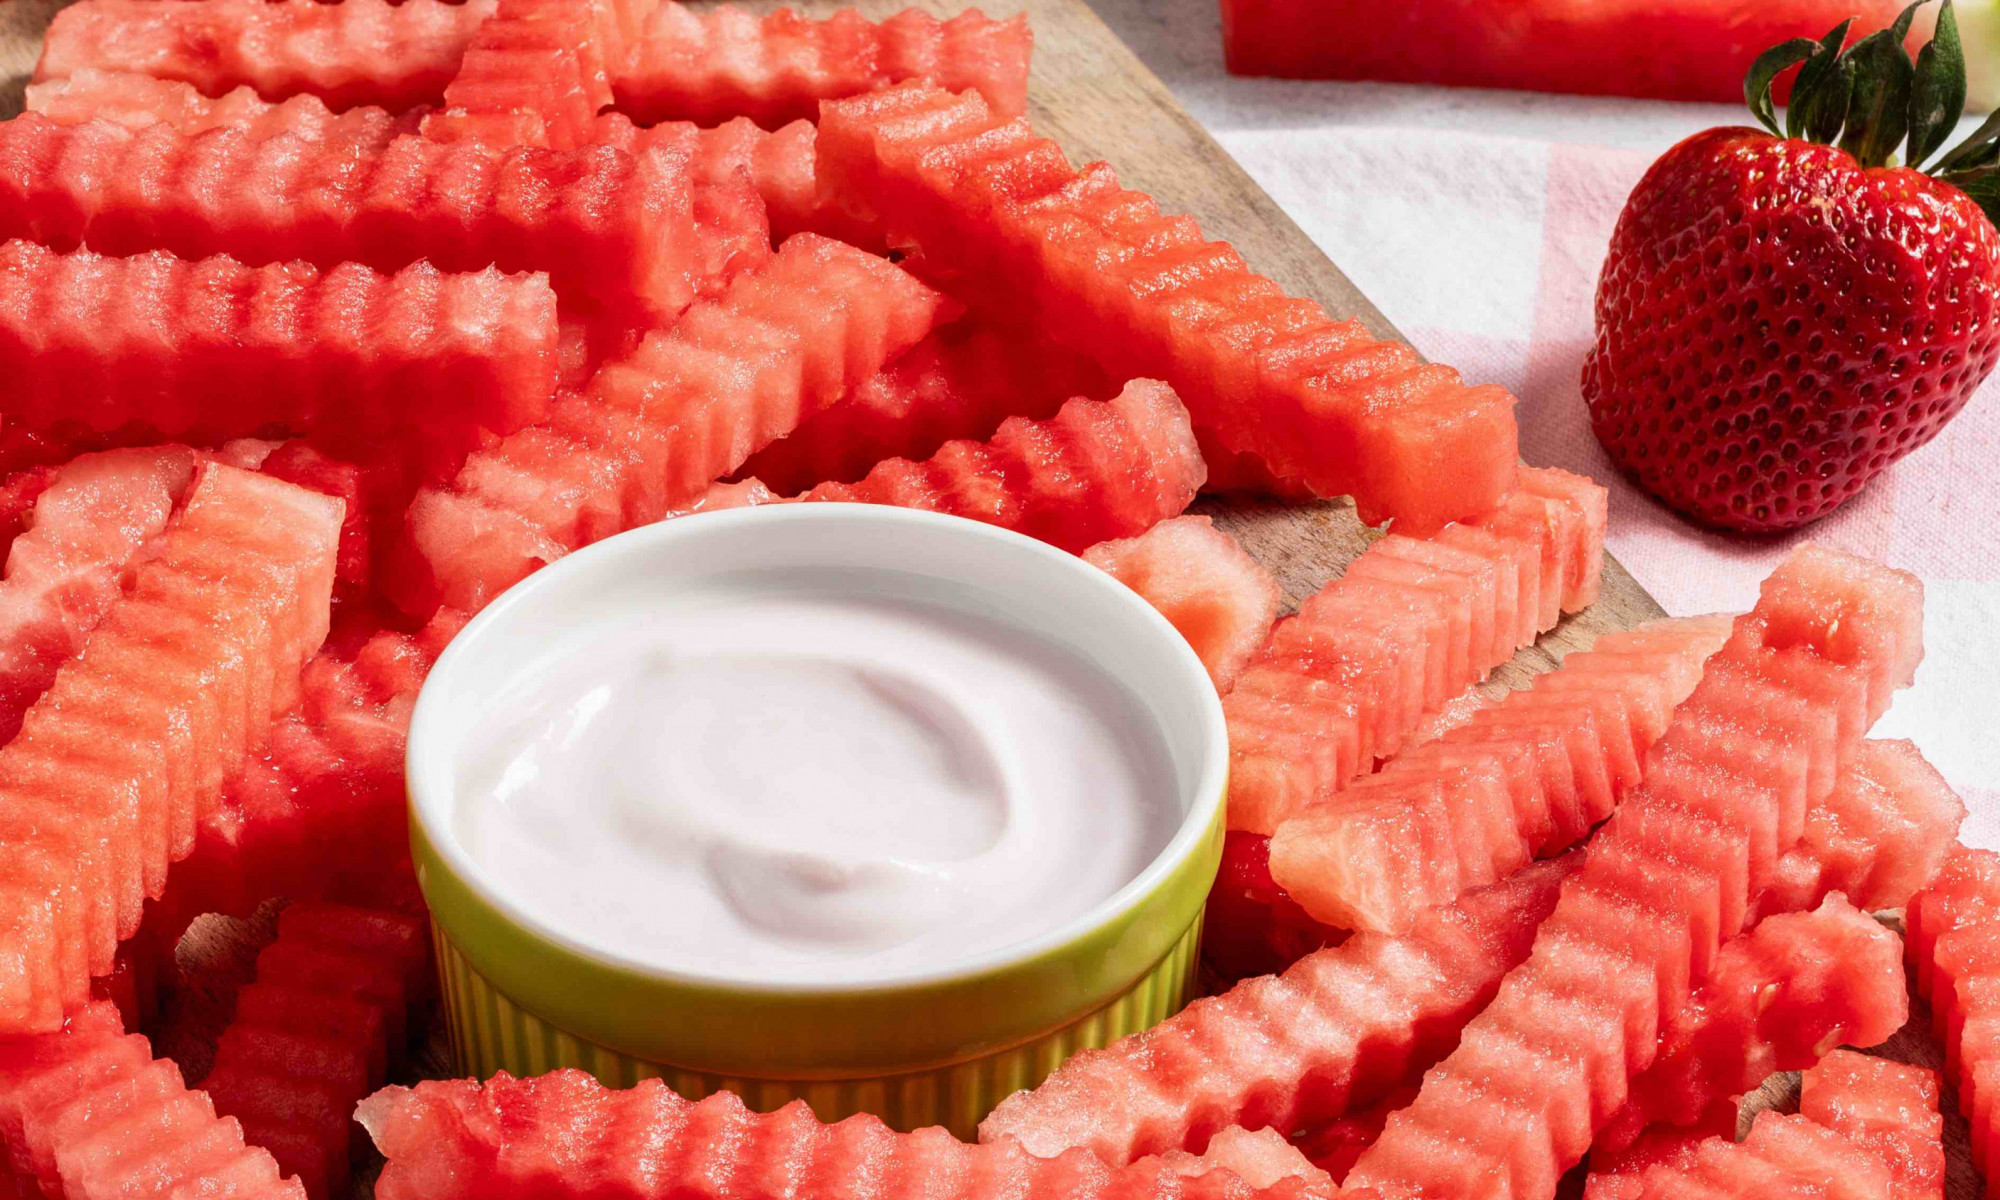 Watermelon cut into crinkle cut "fries" with dipping sauce